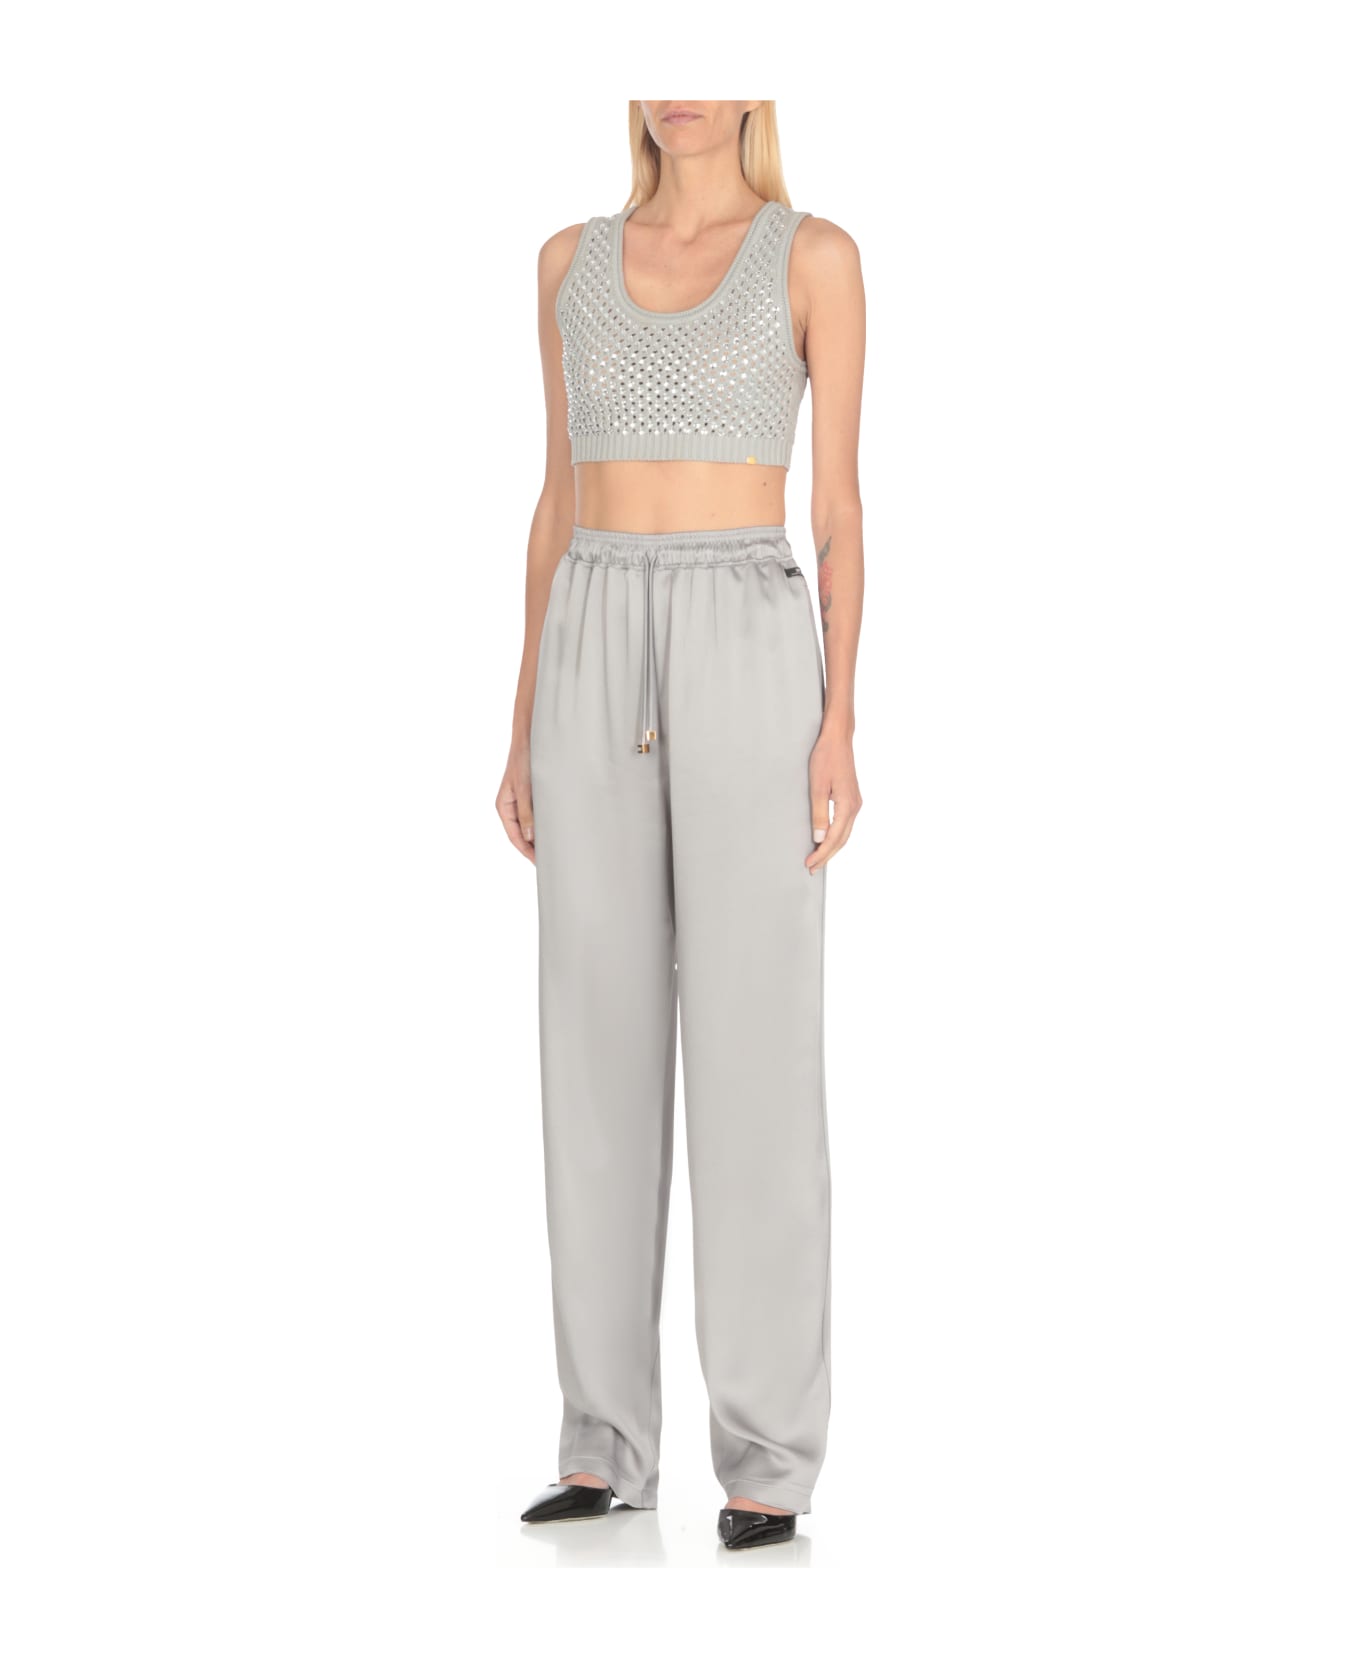 Elisabetta Franchi Knitted Top With Strass - Grey タンクトップ